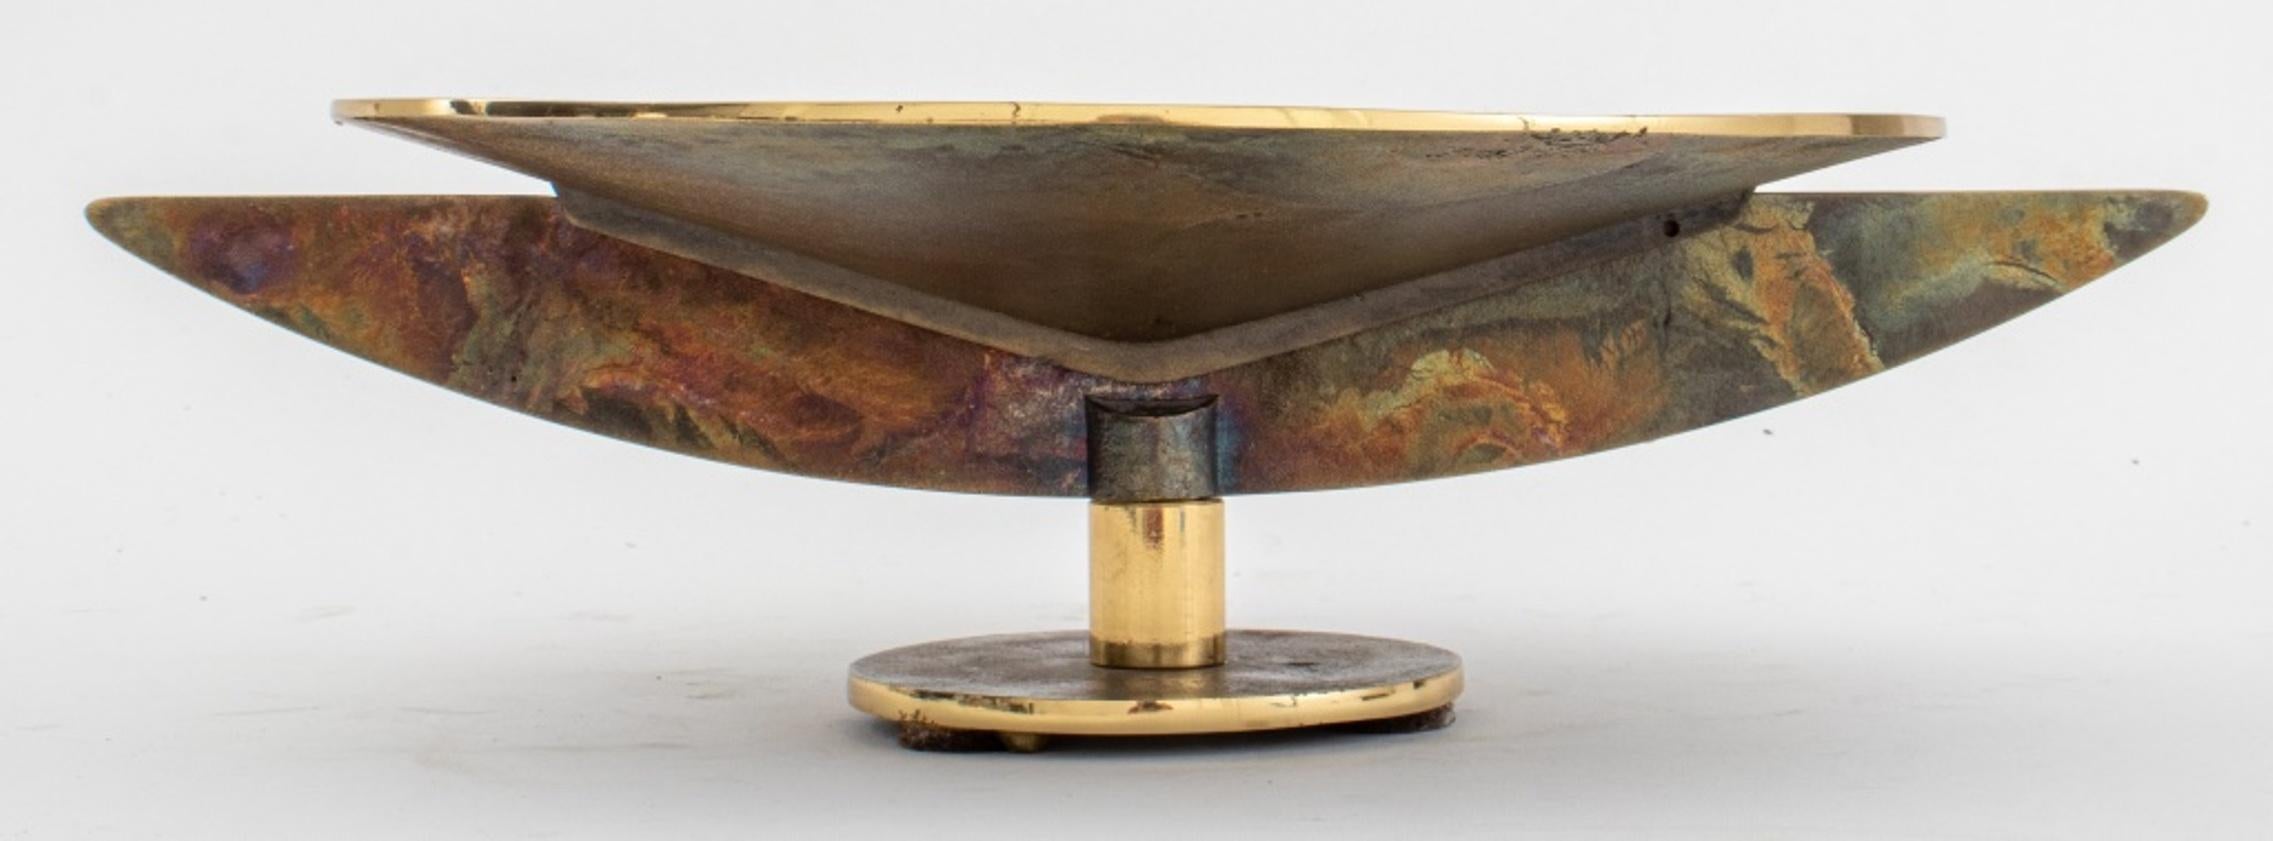 Modern sculptural gilt metal center plate, fruit bowl or compotier, raised on circular pedestal, illegibly signed to underside, circa late 20th century. Measures: 4.25